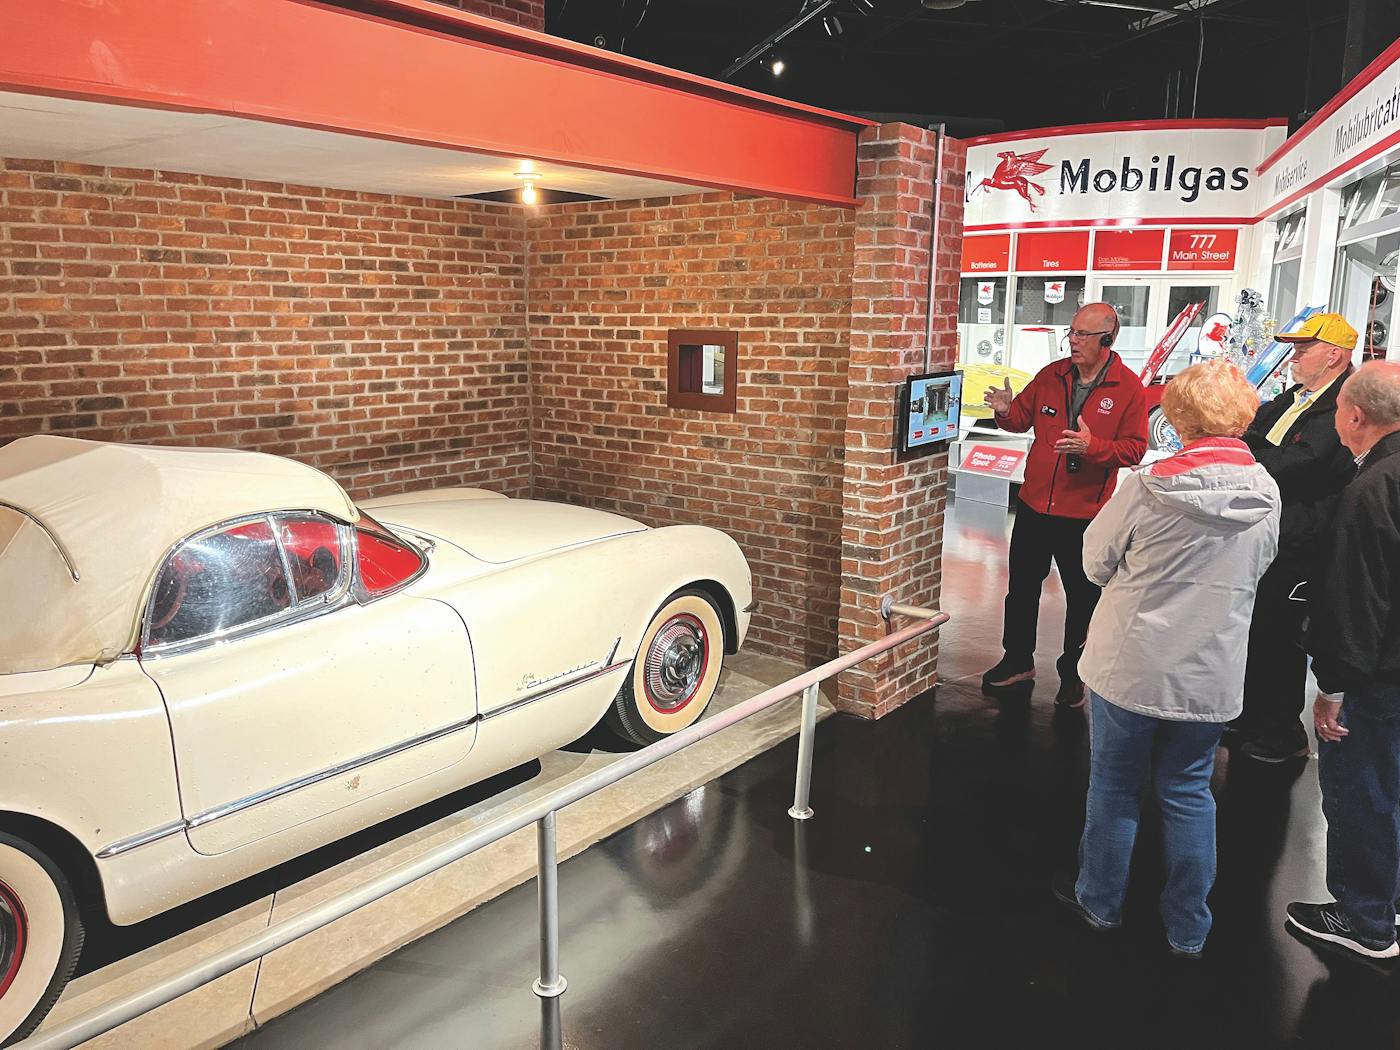 Vintage white Corvette on display at National Corvette Museum in Bowling Green, Kentucky (photo courtesy of National Corvette Museum))